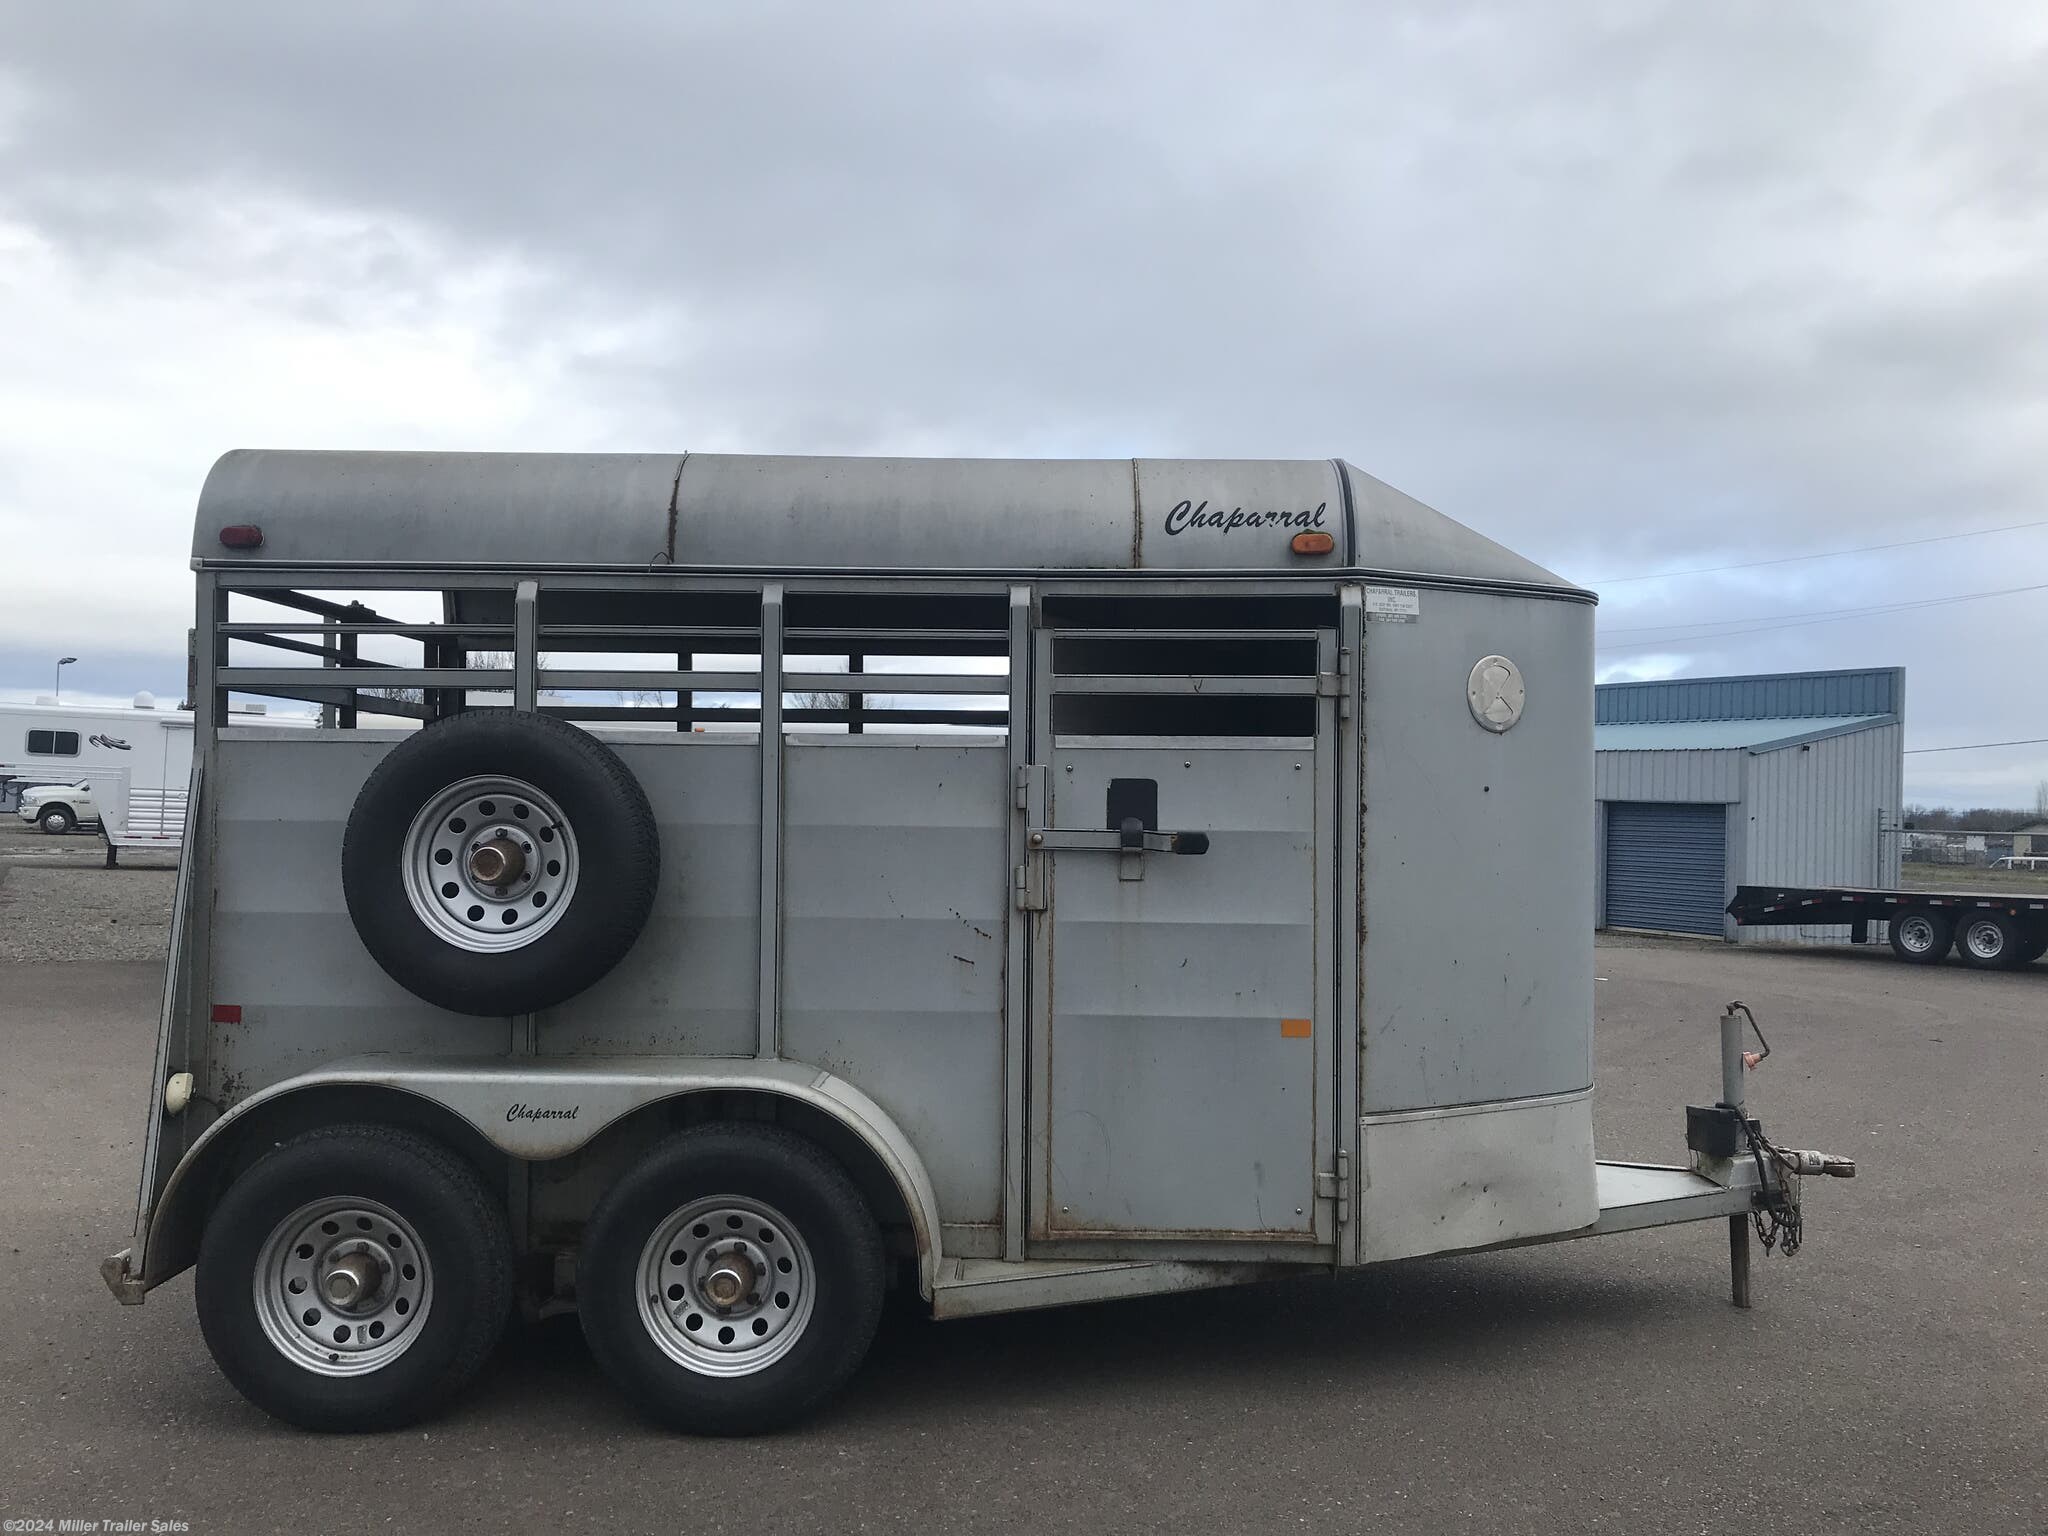 Used Livestock Trailers for Sale by Owner on Craigslist - wide 6